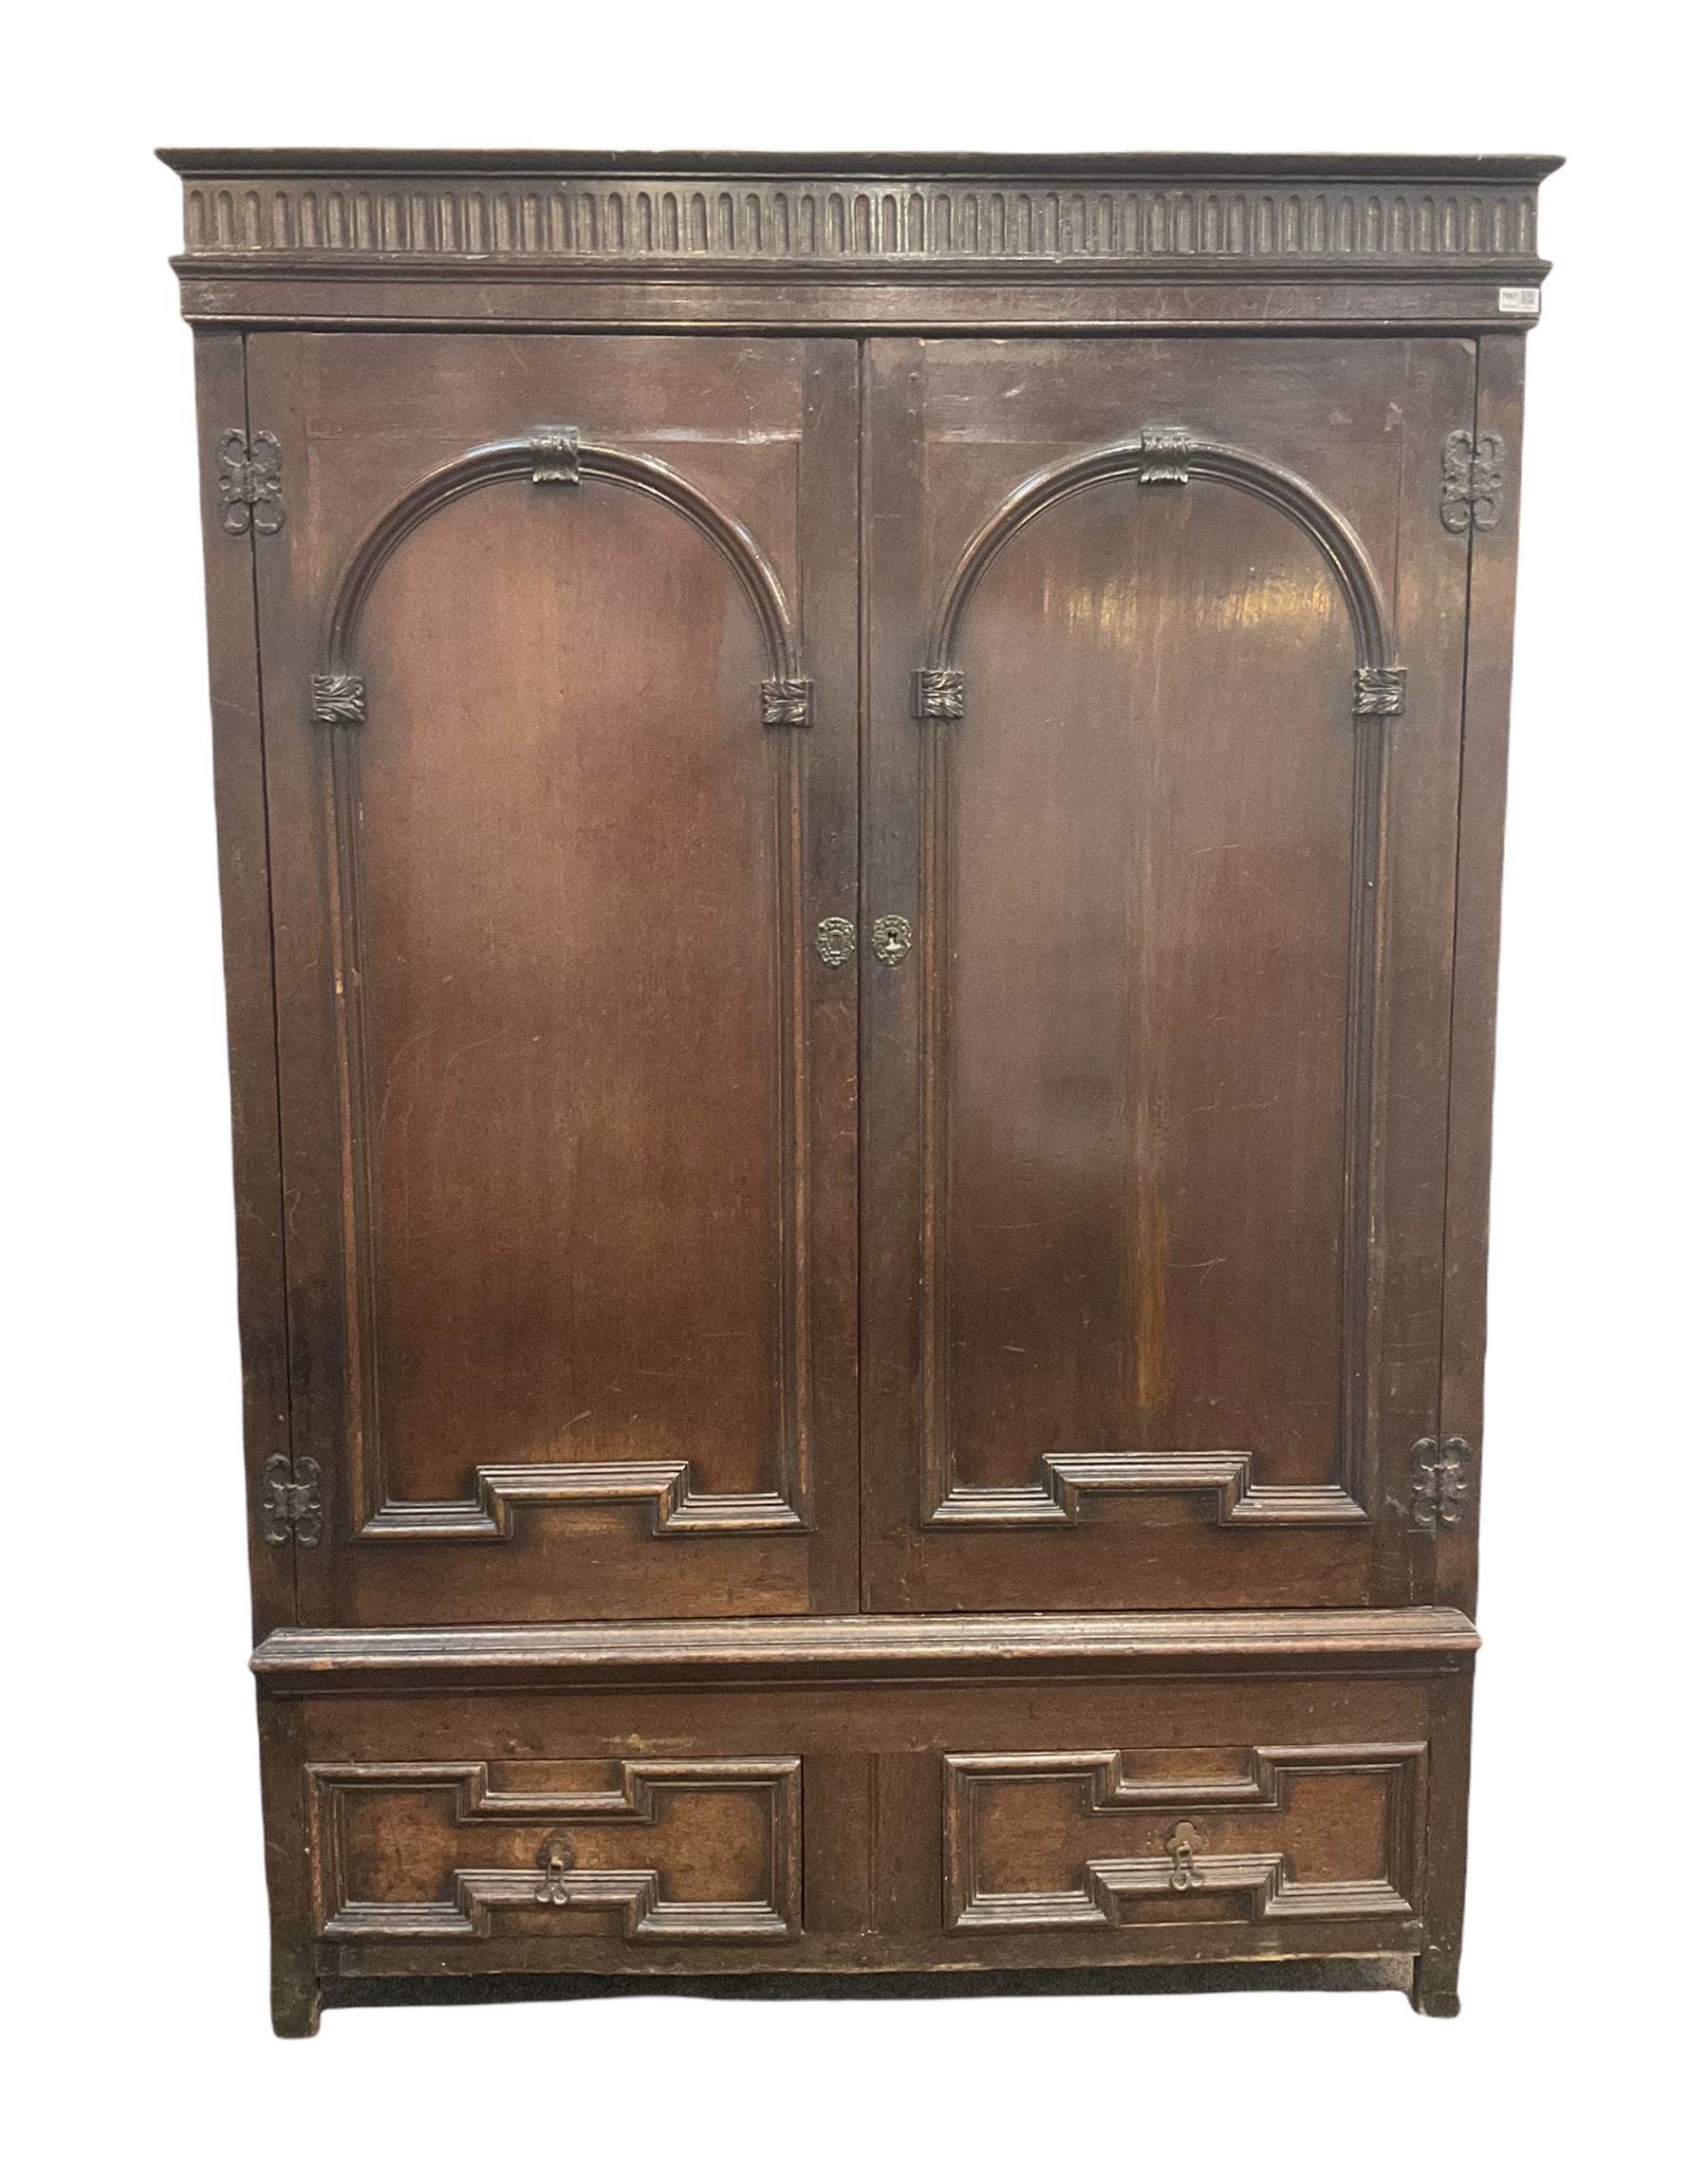 Ds Late 18th Century Oak Hanging Cupboard The Projecting Cornice Over 